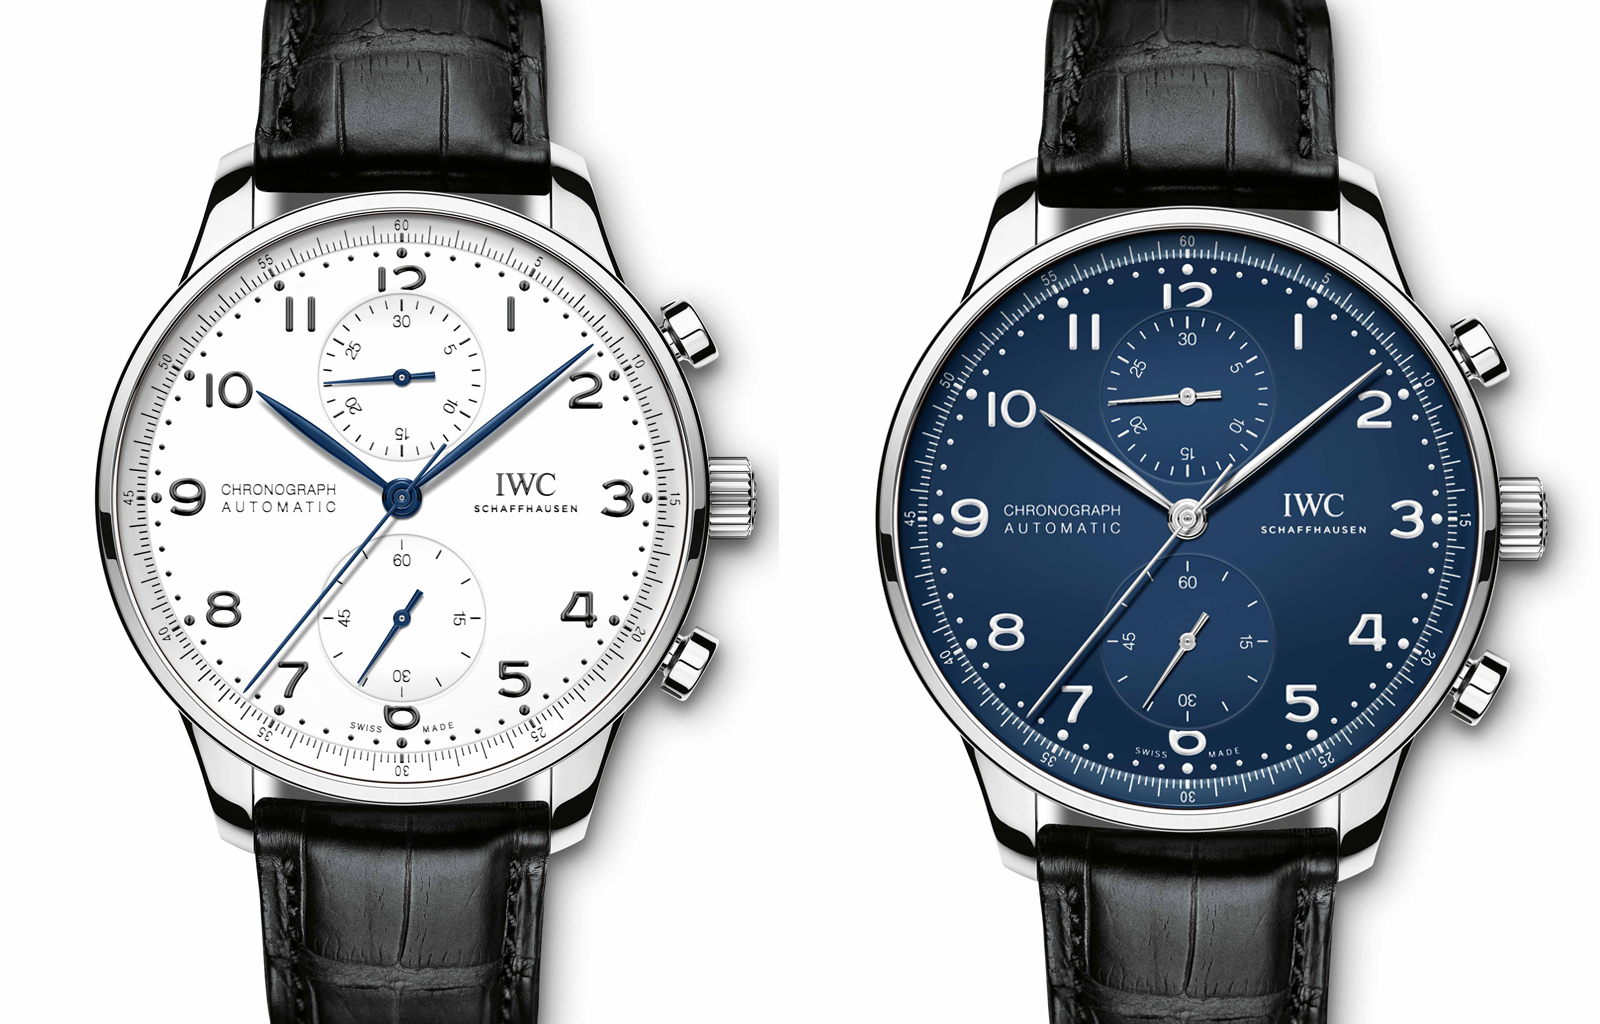 The Portugieser Chronograph Edition “150 Years